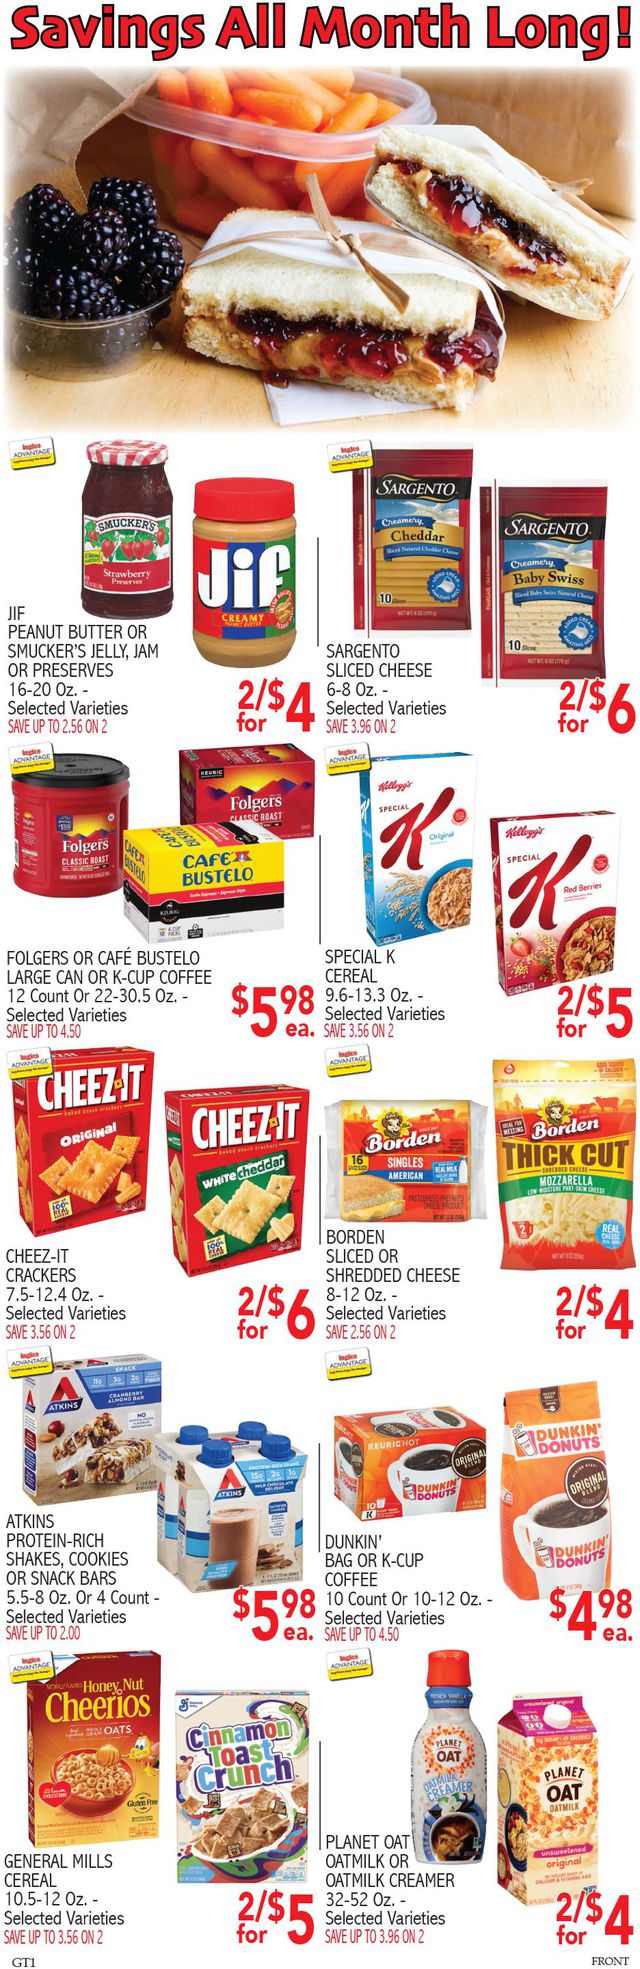 Ingles Ad from 01/19/2022